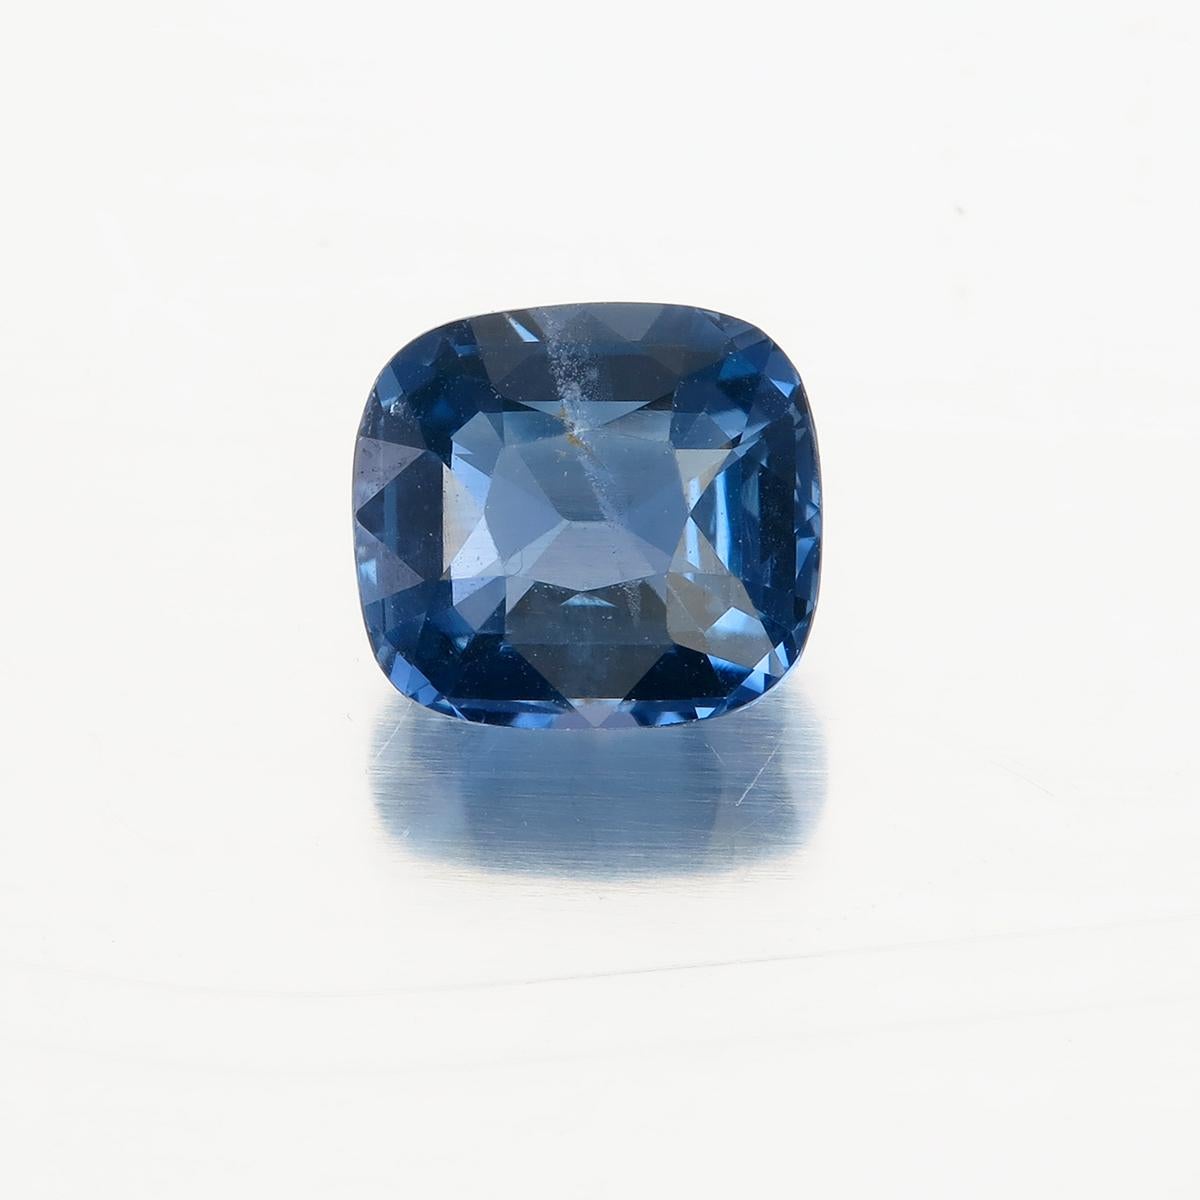 1.42 Carat Blue-Violet  Spinel from Sri Lanka
Shape: Antique. Cushion
Cutting Style: Faceted Brilliant Modified Step
Dimensions: 7.09 x 6.47 x 3.71 mm
Color: Blue-Violet low saturation and medium to medium light tone
Weight: 1.42 Carat
No Heat or